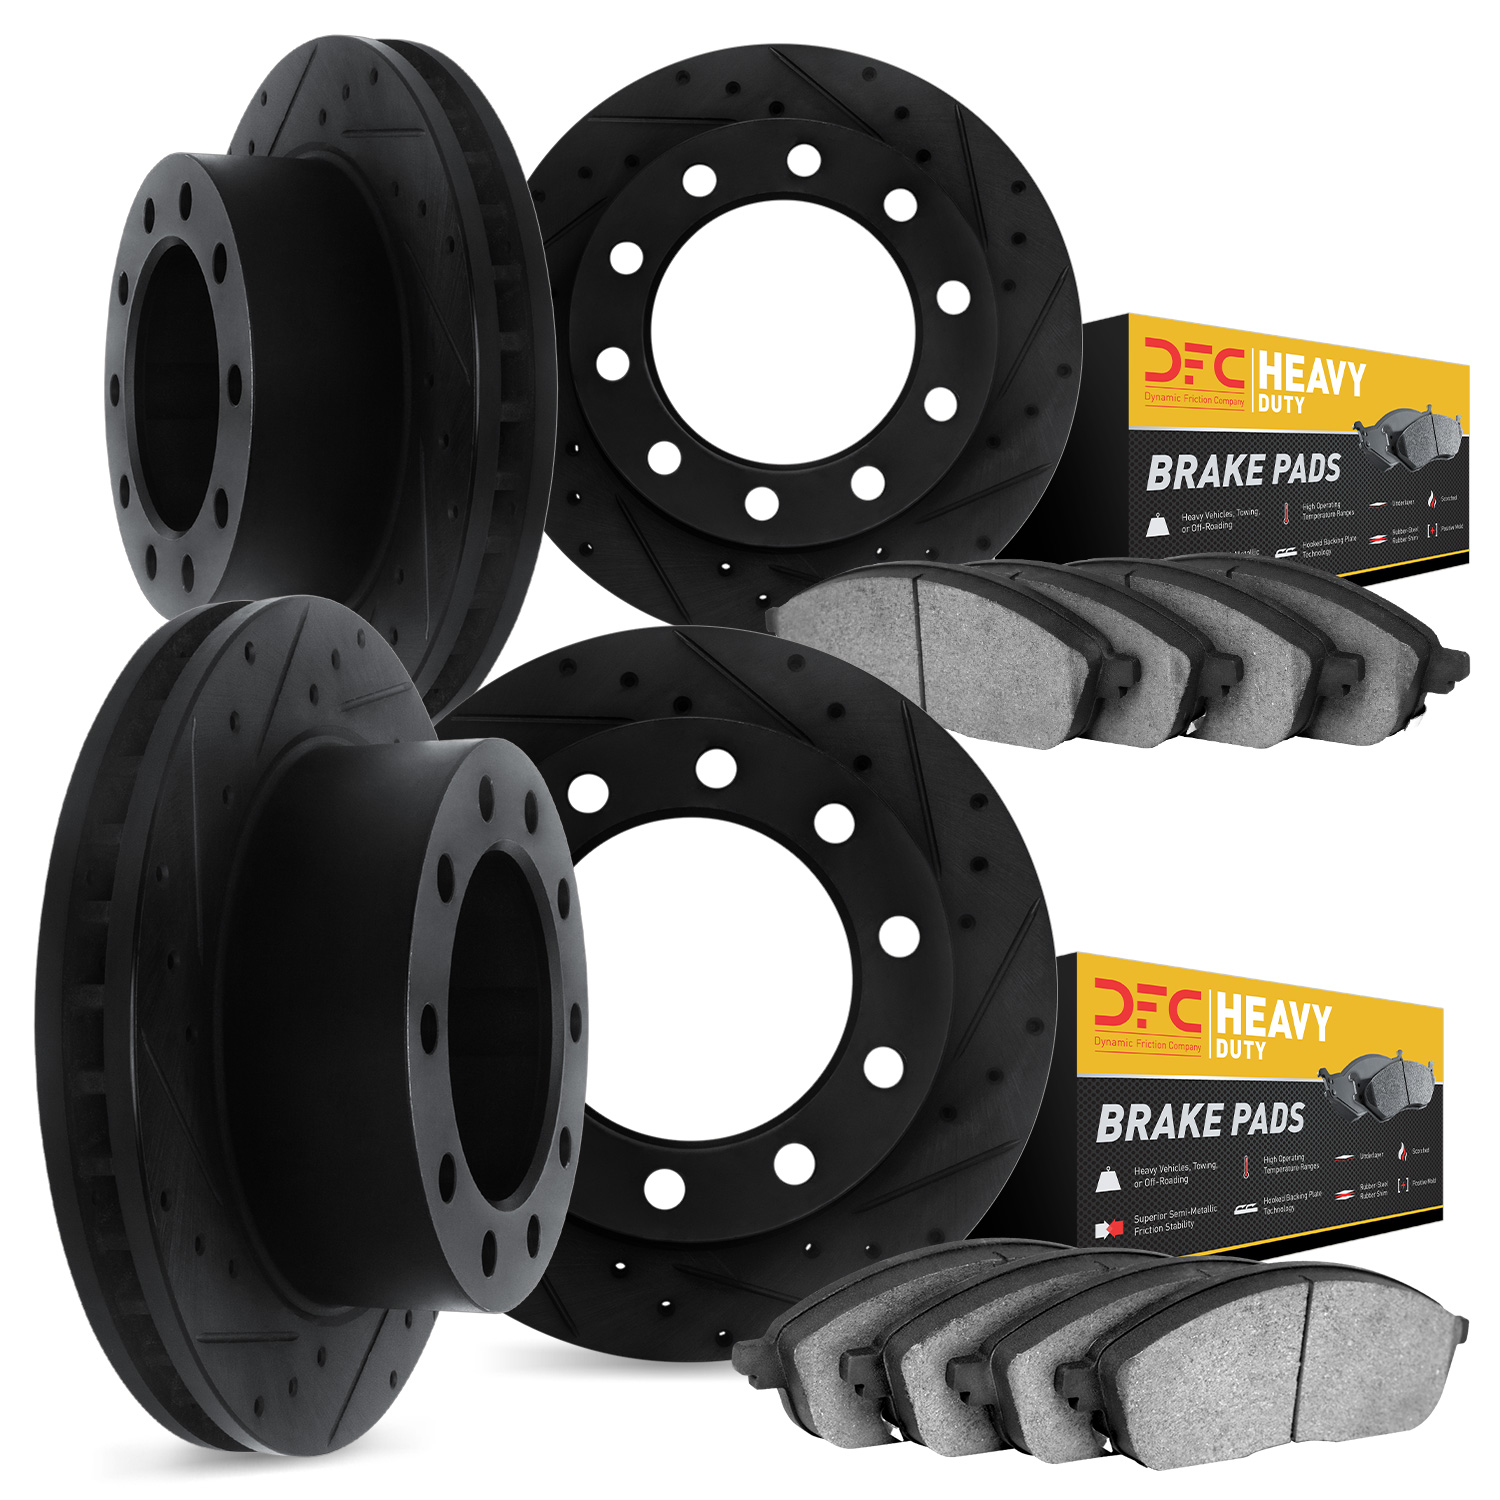 8204-99121 Drilled/Slotted Rotors w/Heavy-Duty Brake Pads Kit [Silver], Fits Select Ford/Lincoln/Mercury/Mazda, Position: Front